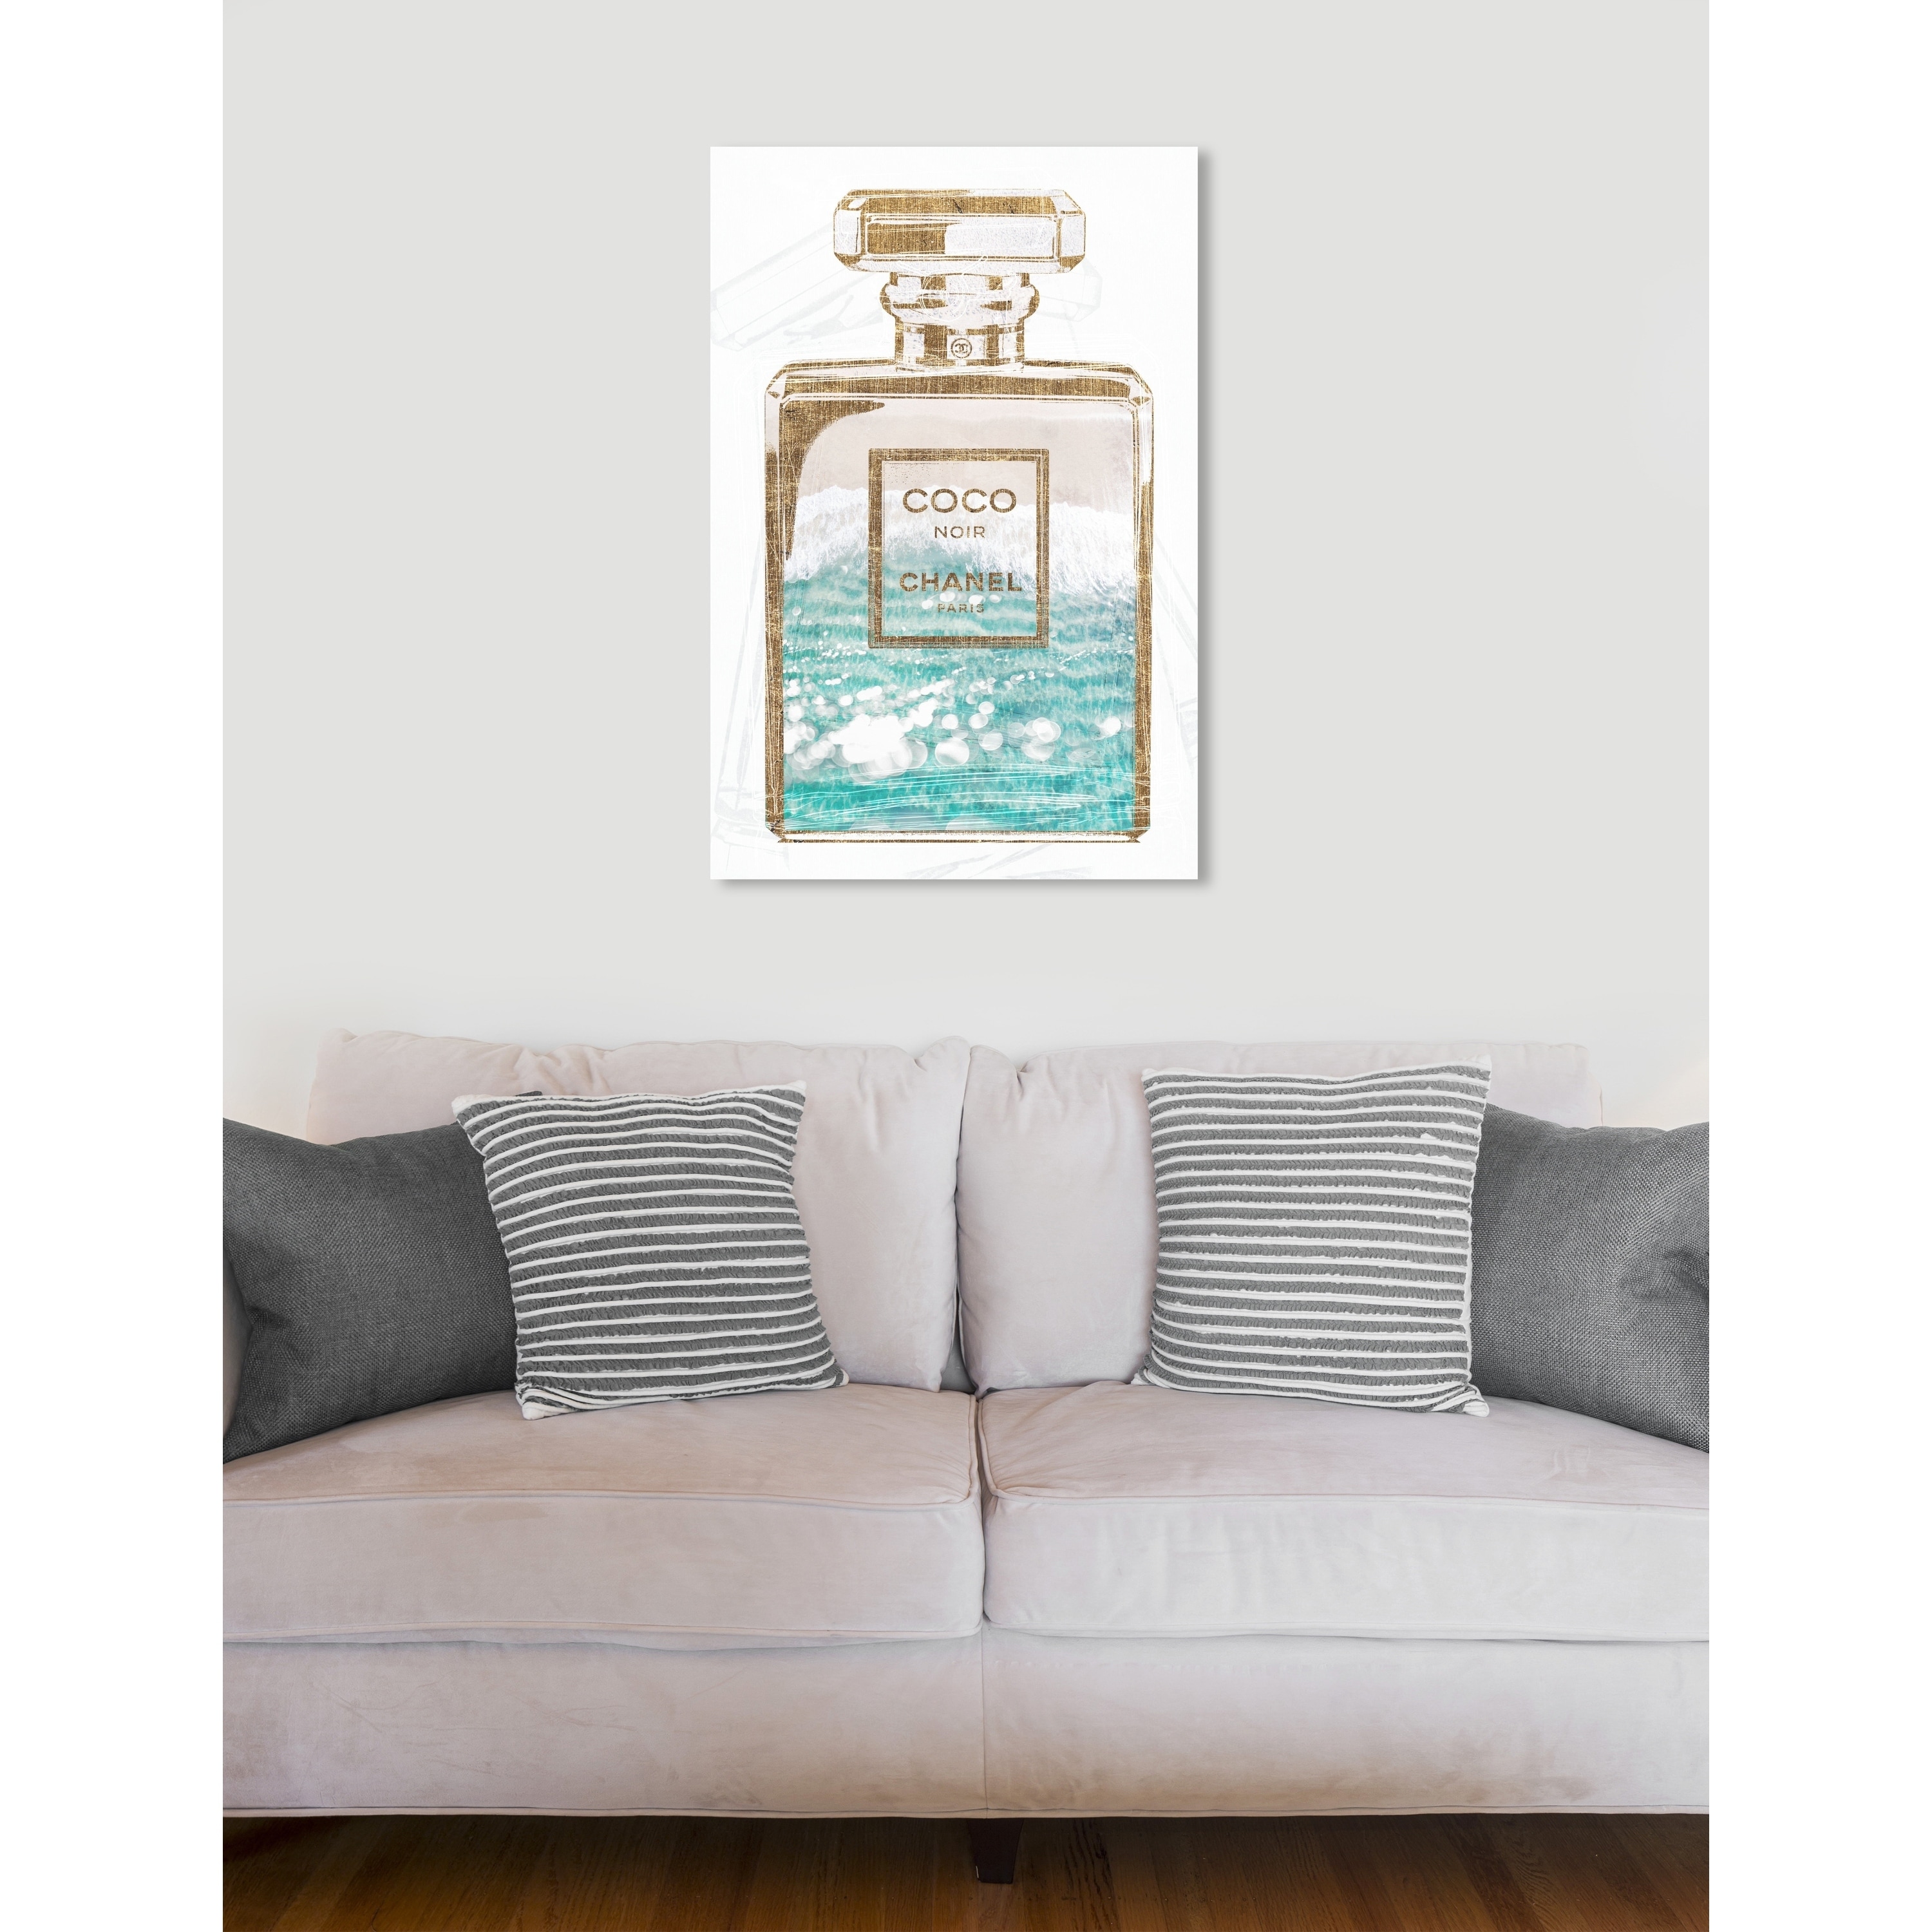 Oliver Gal 'Coco Water Love' Fashion and Glam Wall Art Canvas